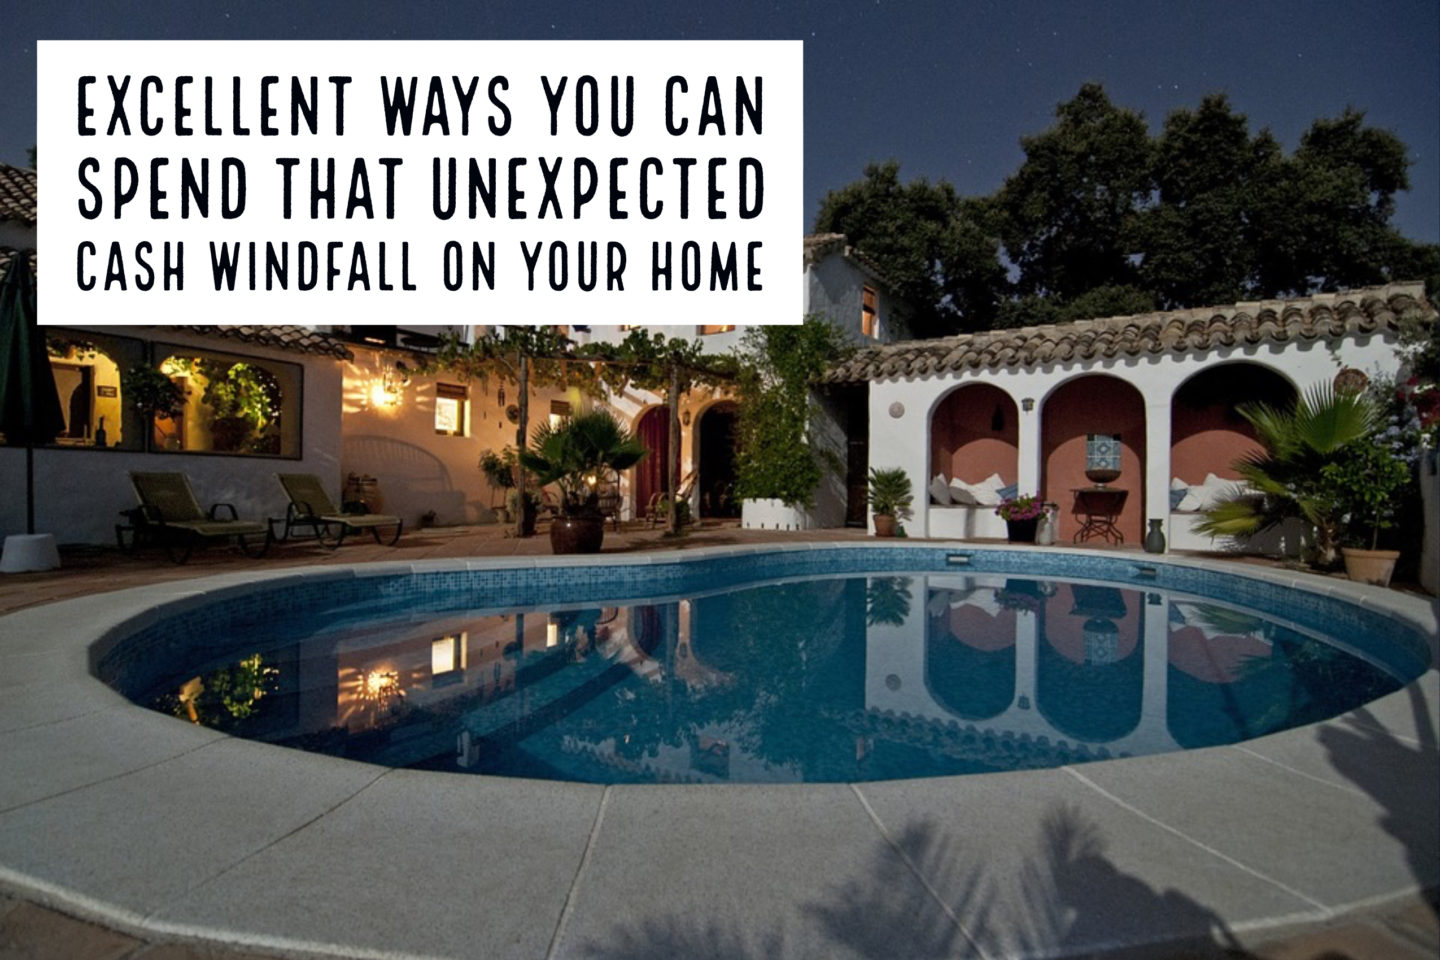 Money // Excellent Ways You Can Spend That Unexpected Cash Windfall on Your Home or For Your Future